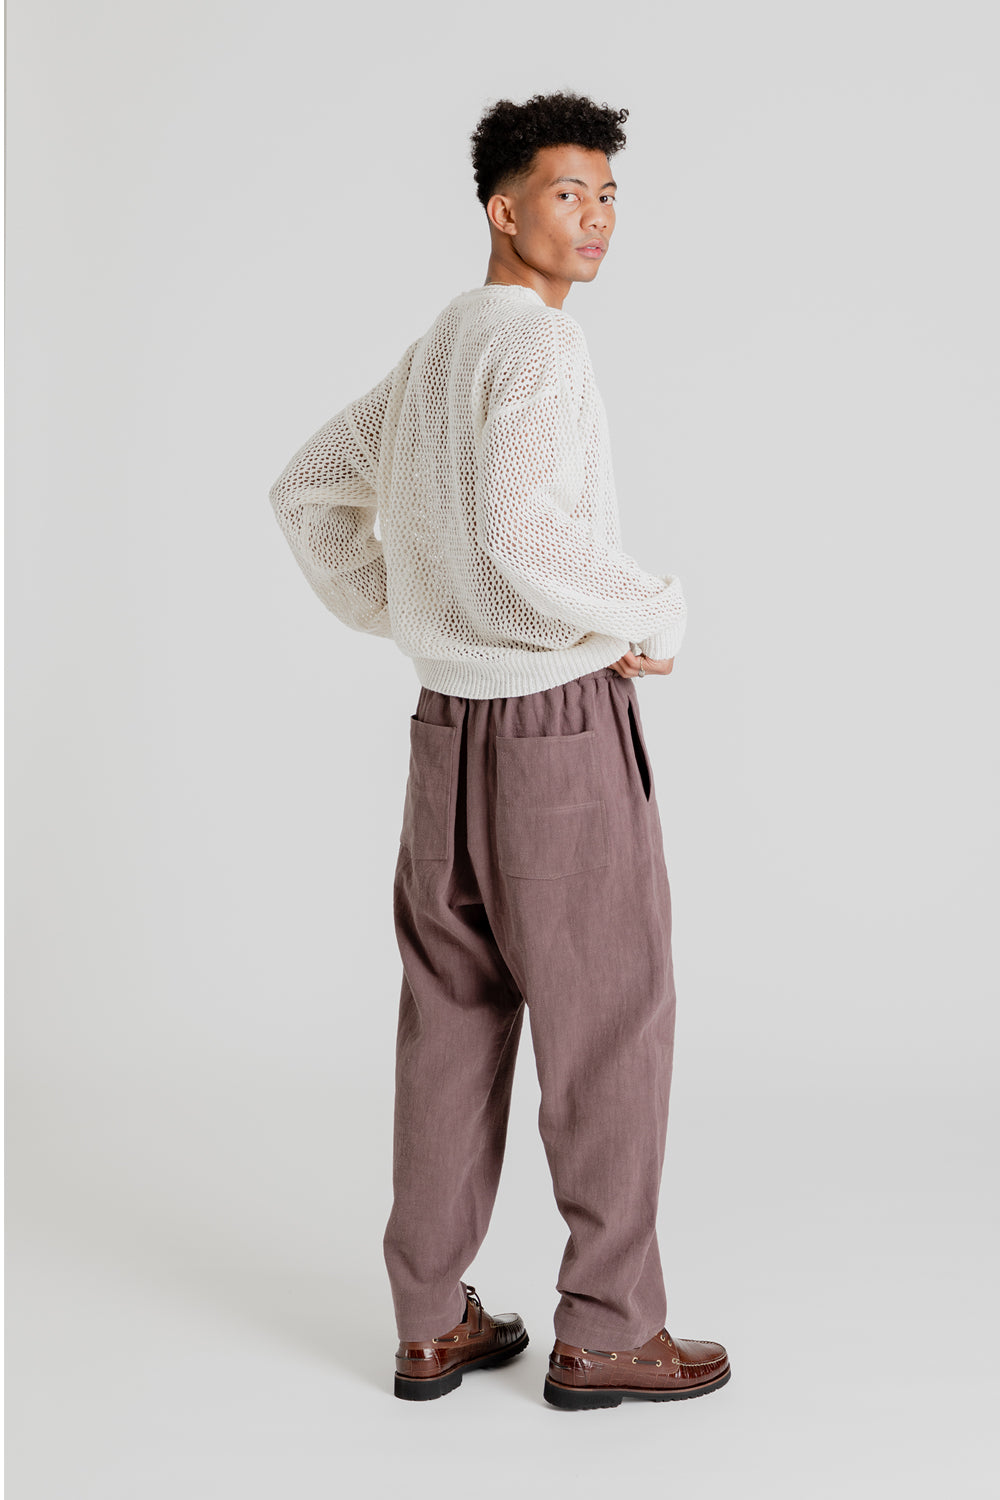 S.K. Manor Hill Bronco Pant in Brown